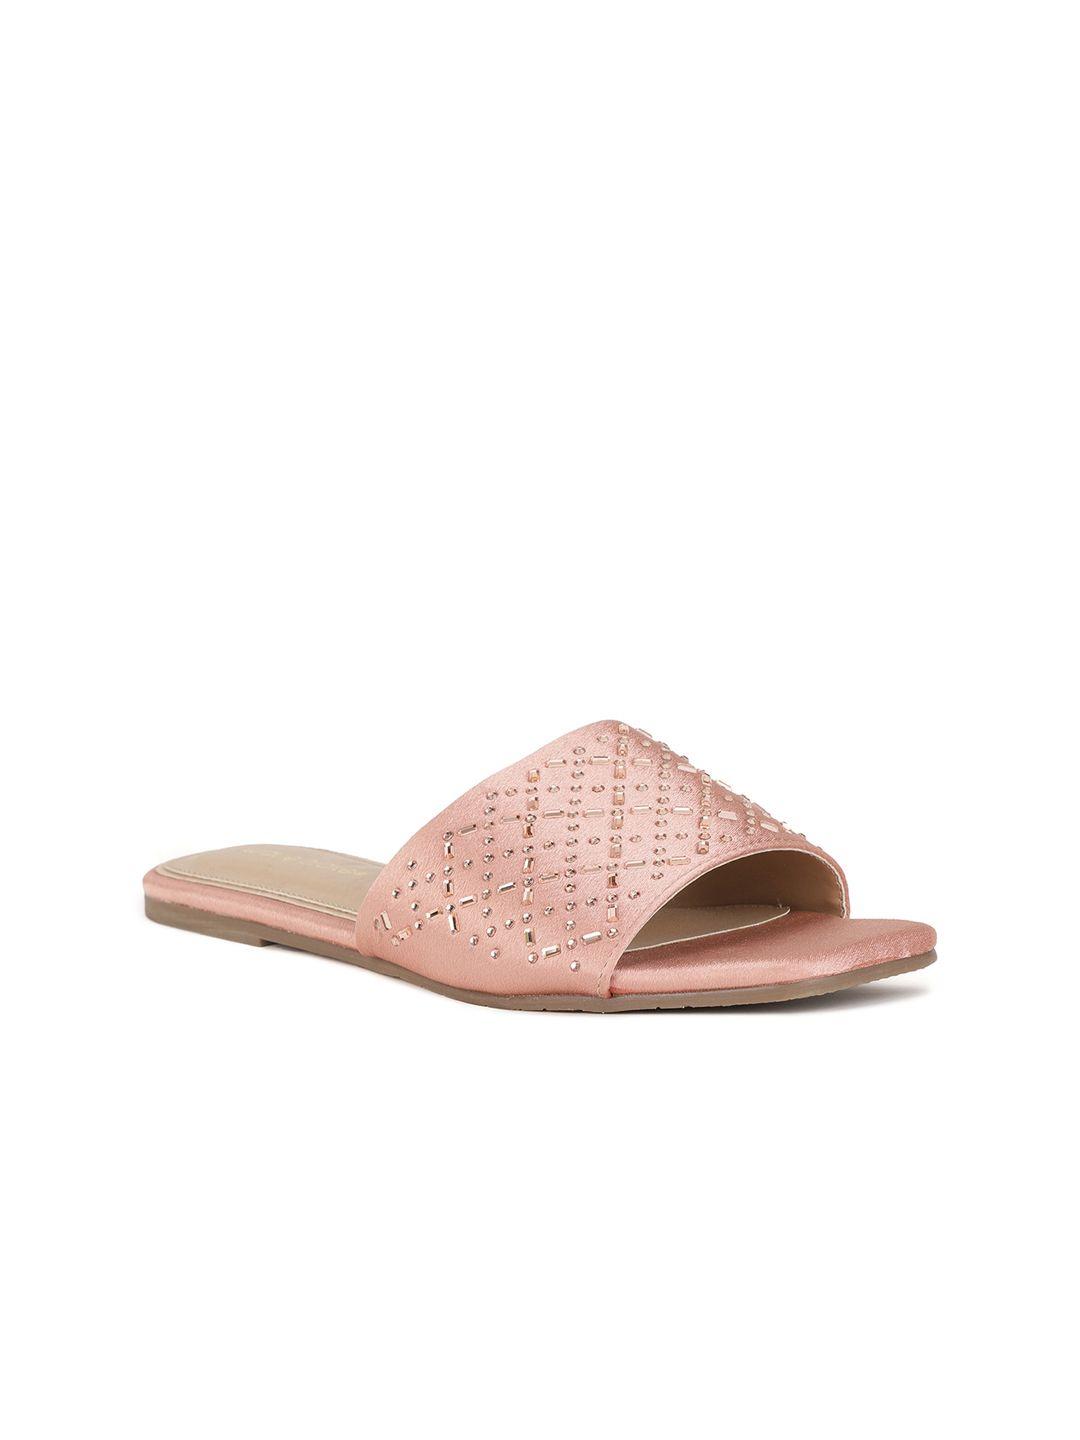 marie claire women rose gold open toe flats